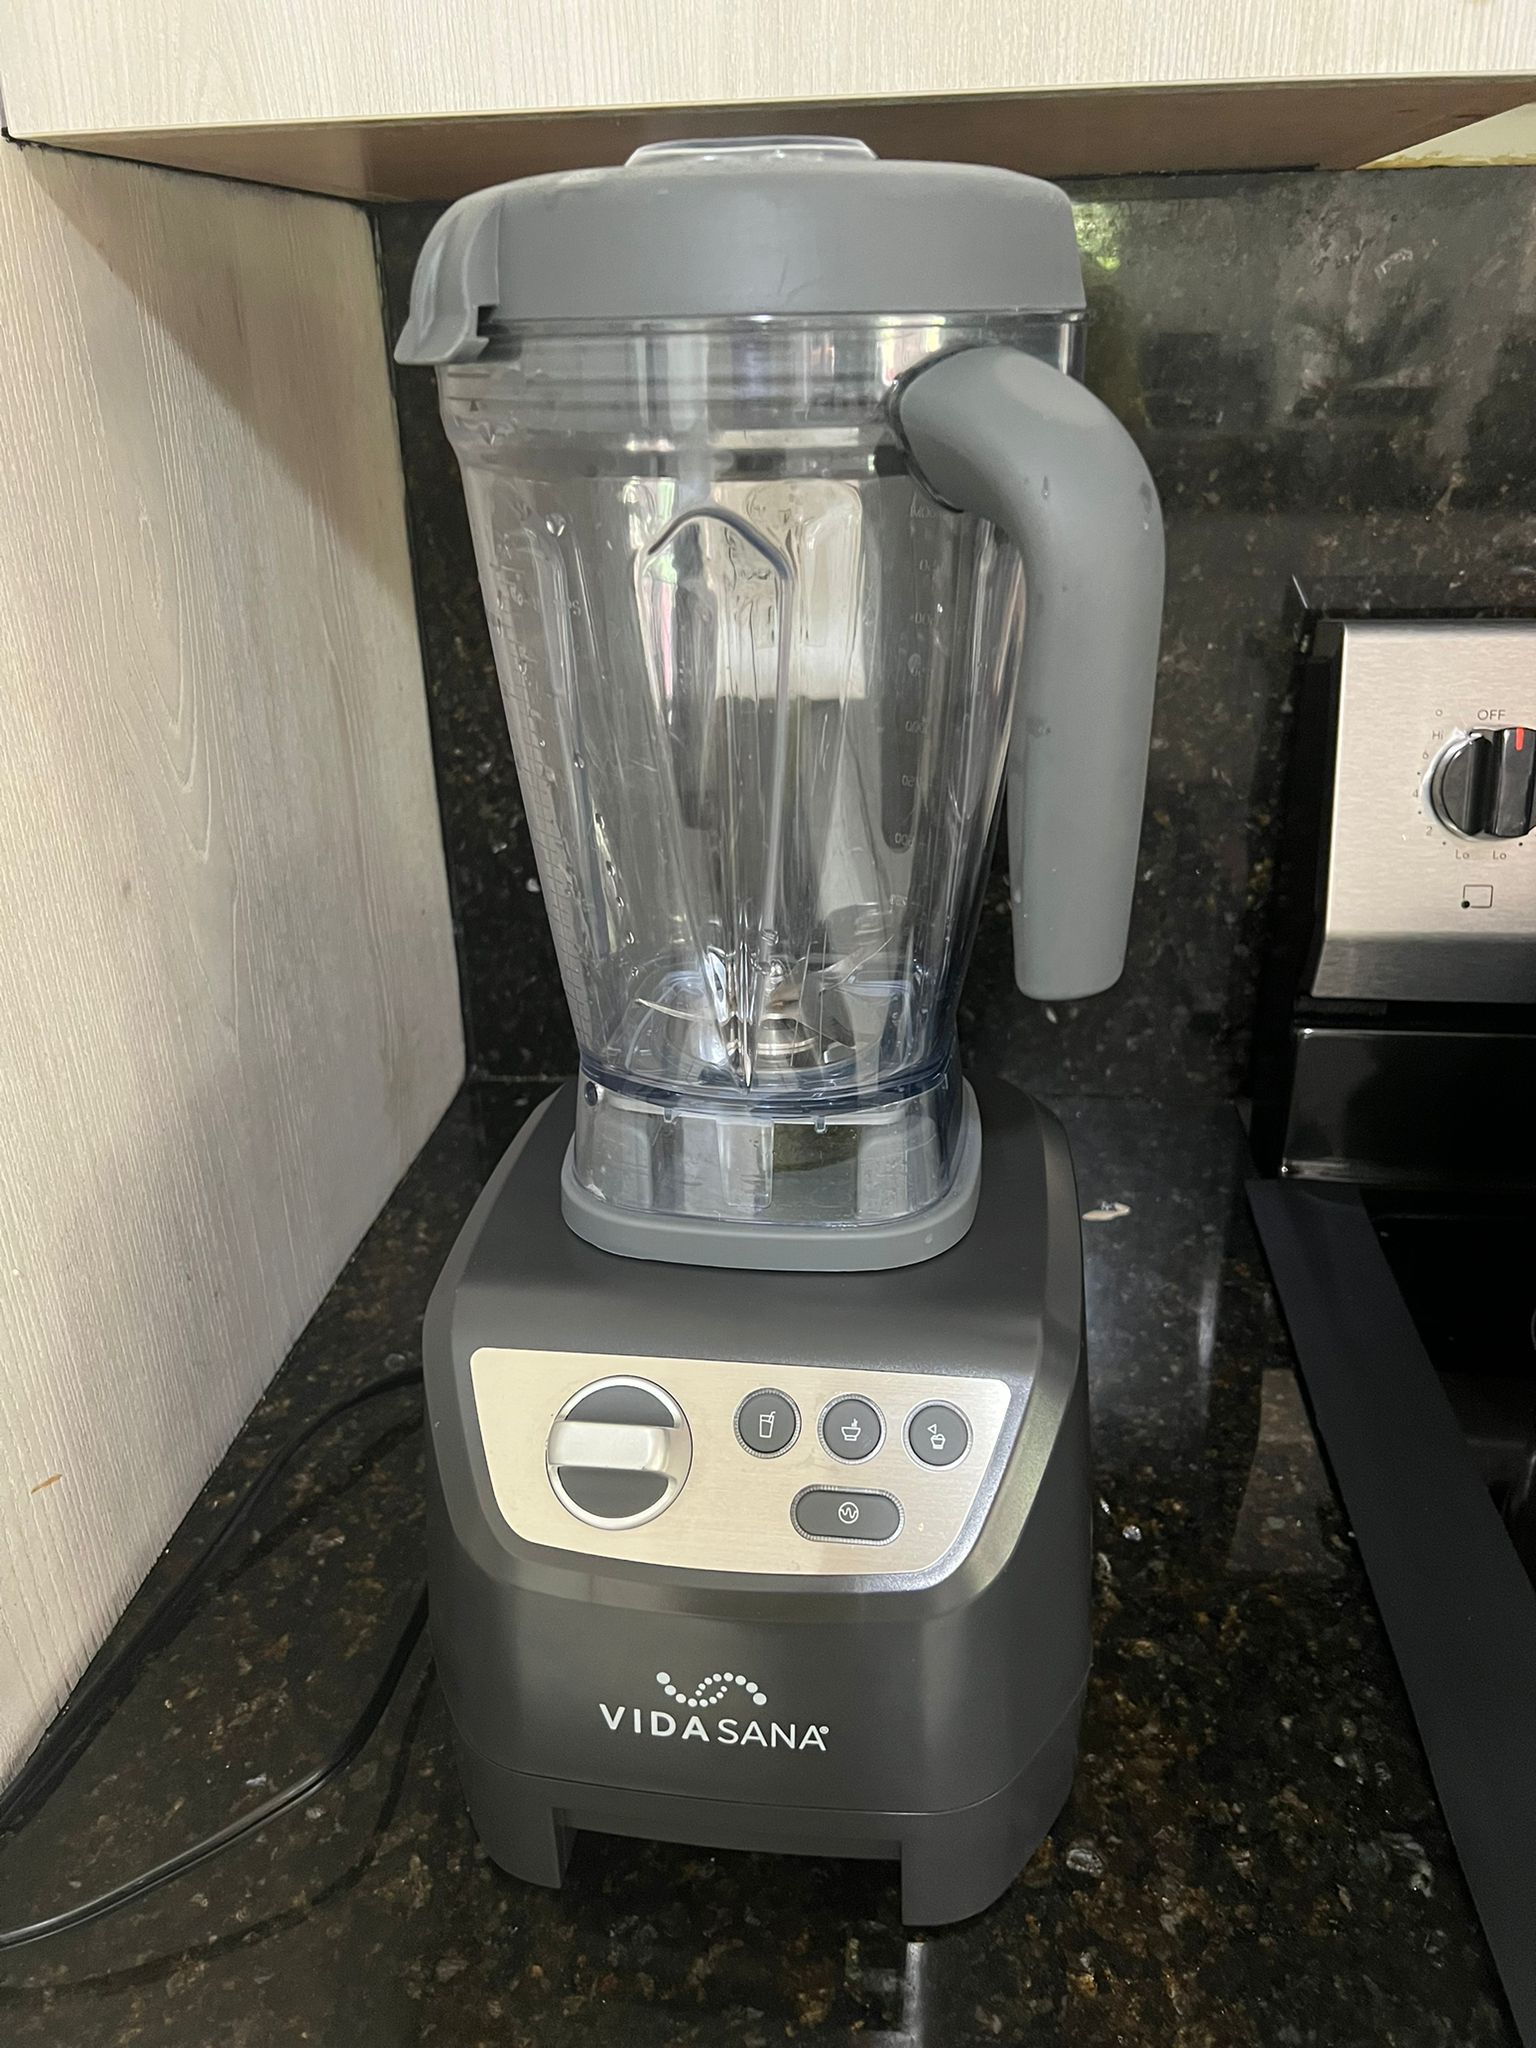 blender and mixing Princess House's Vida Sana for Sale in Miami, FL -  OfferUp